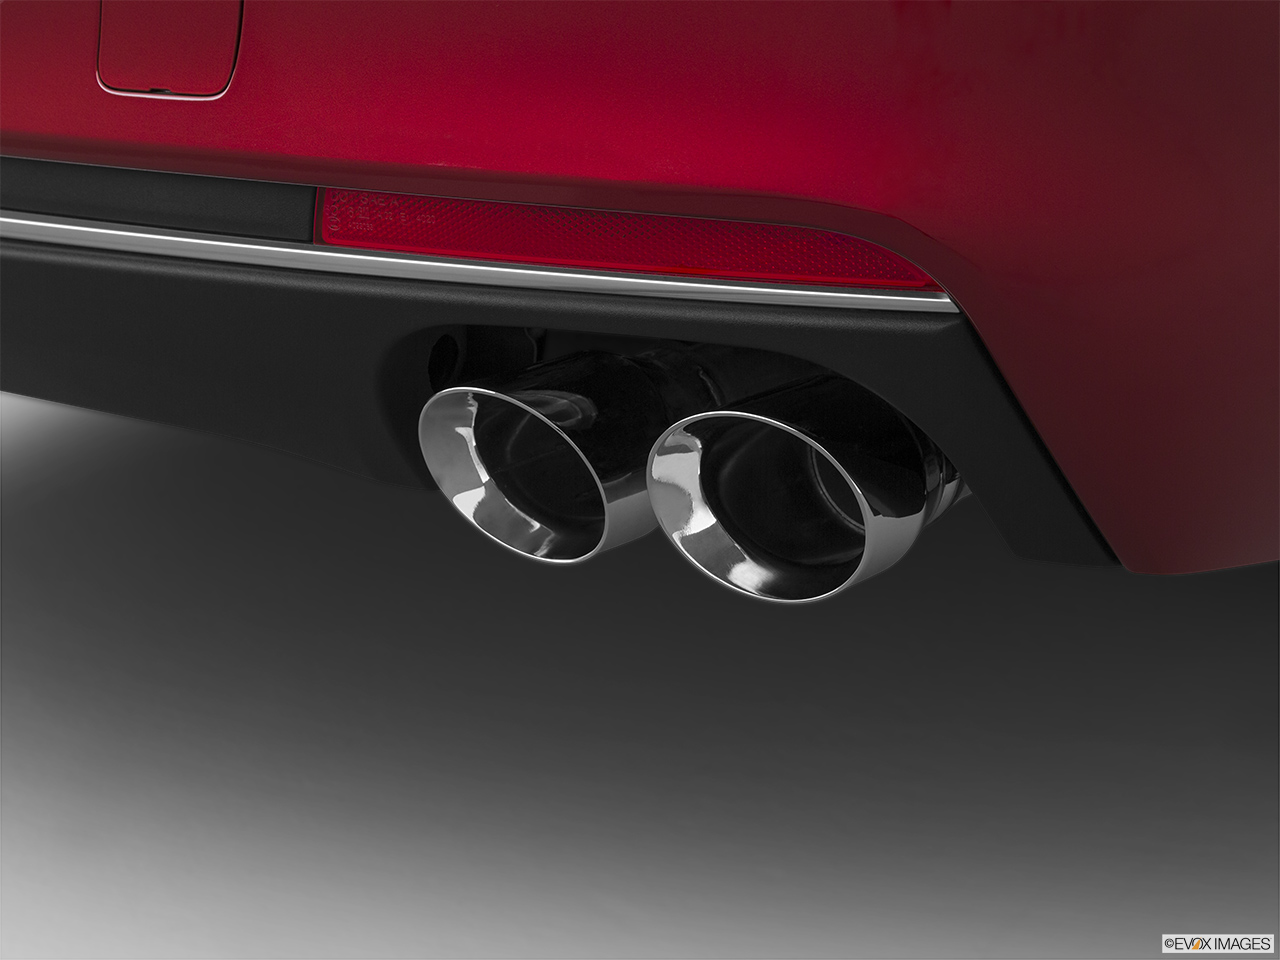 2020 Cadillac CT6 Luxury Chrome tip exhaust pipe. 